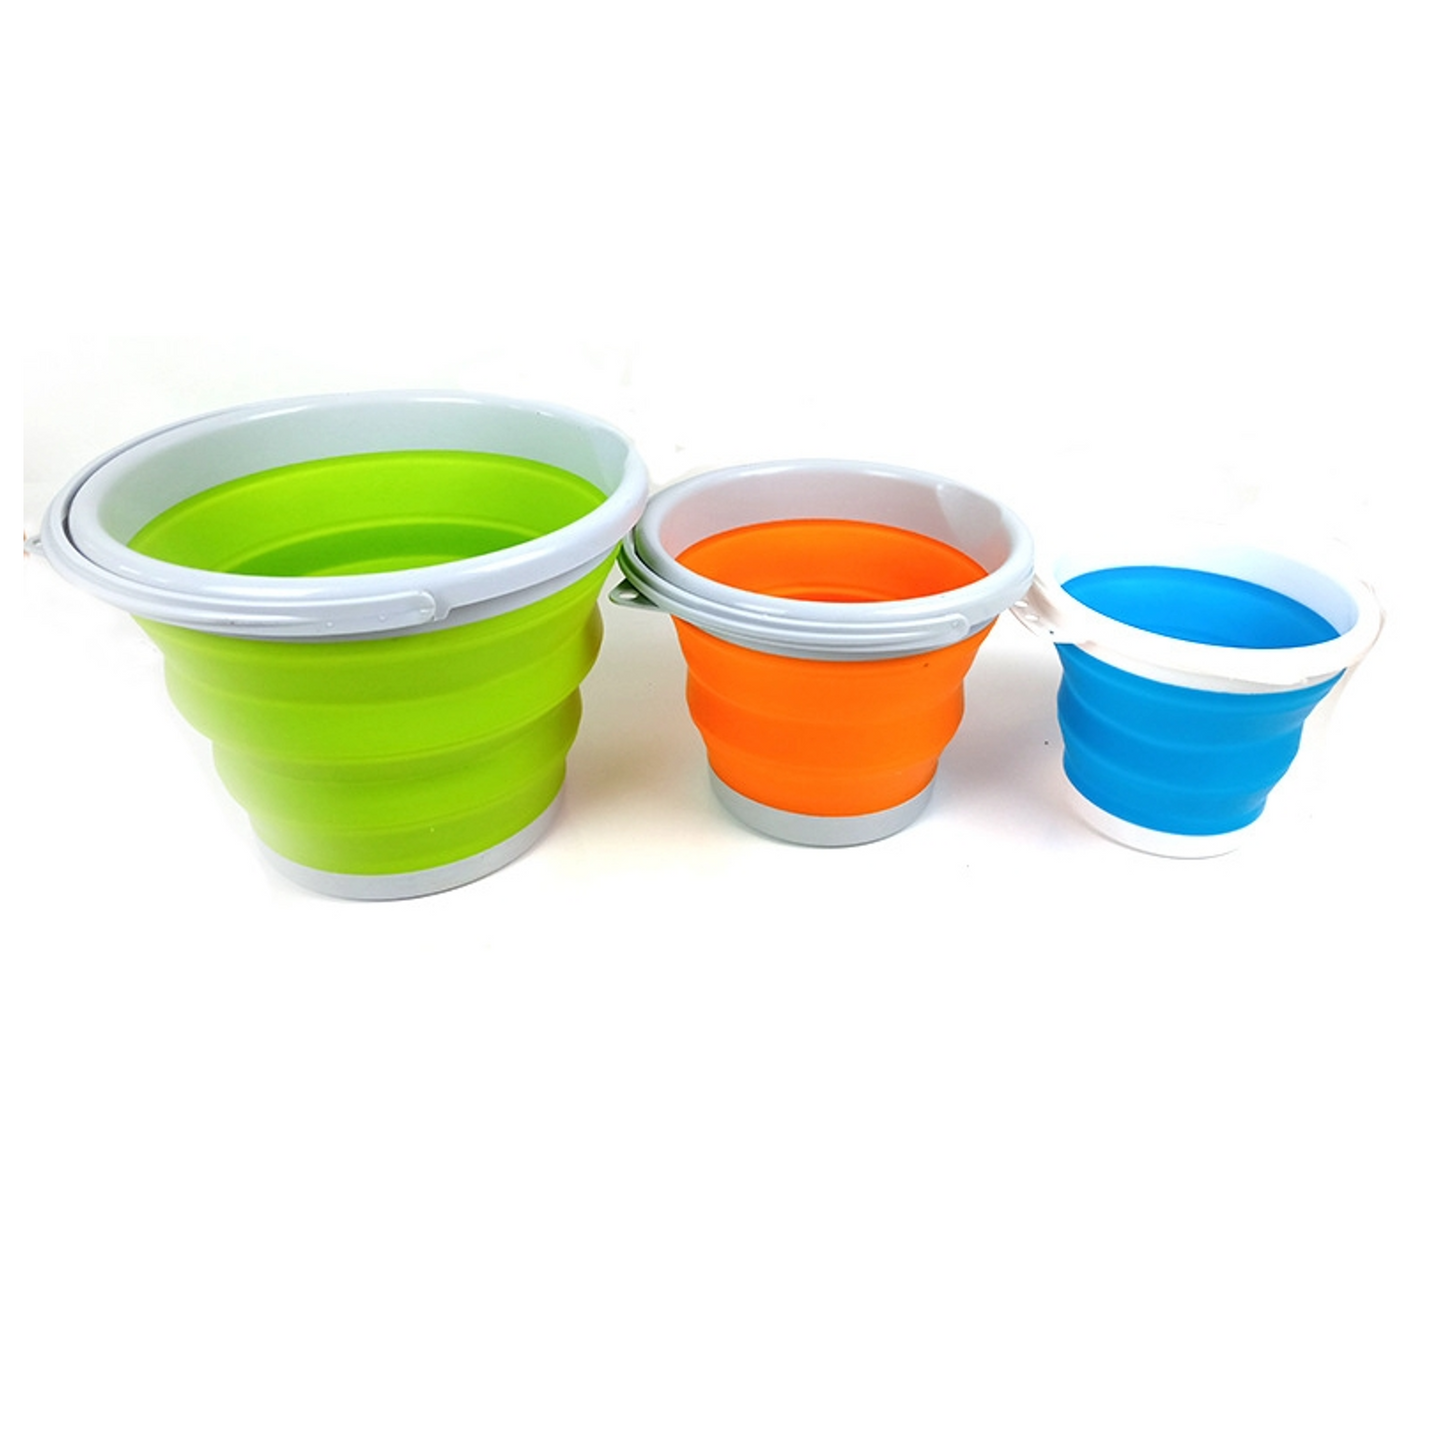 Collapsible water pail